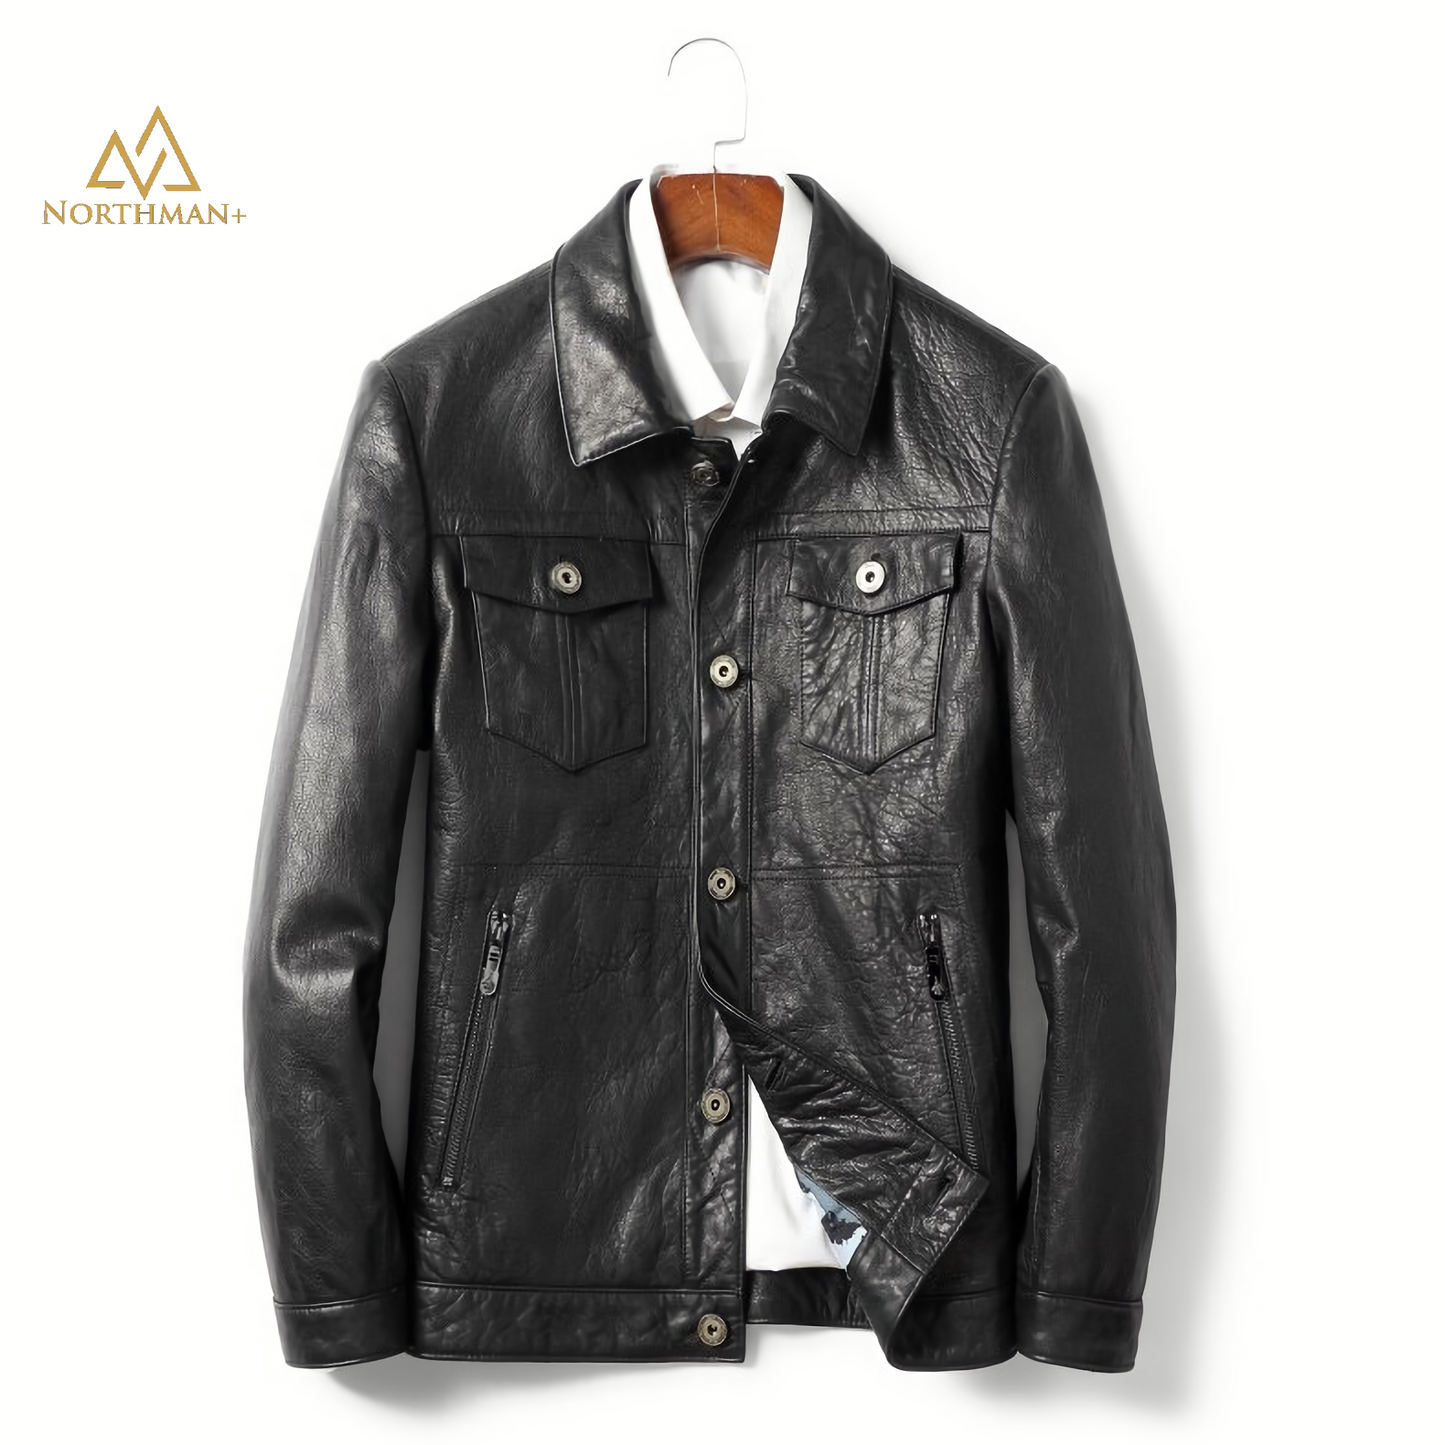 Seargent Field Leather Jacket in Black